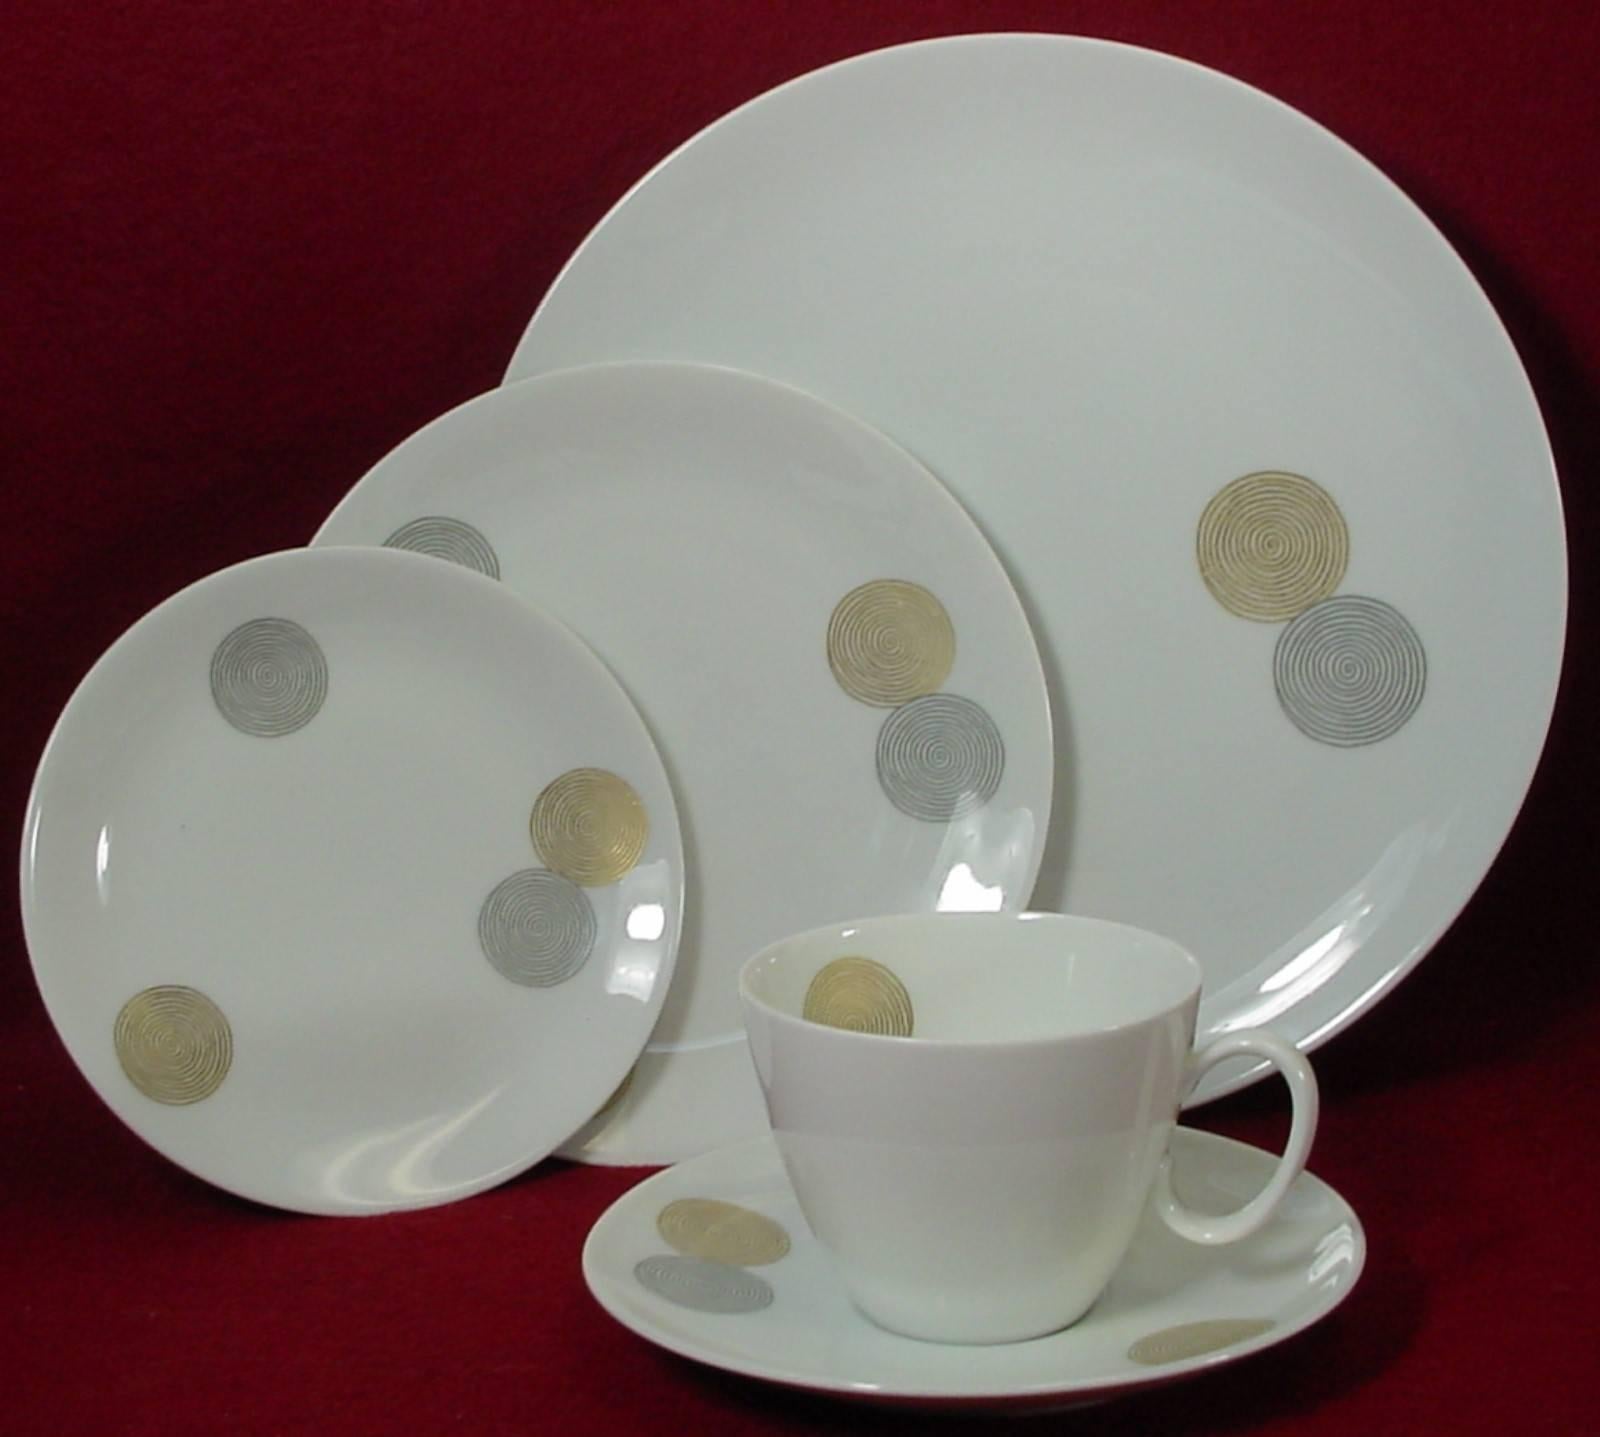 CHINA FINDERS 

China, Crystal, Flatware and Collectible Matching Service is offering ONE (1) 

ROSENTHAL Germany china COINS pattern 40-piece Set Service for 8

in great condition free from chips, cracks, break or stain and show minimal